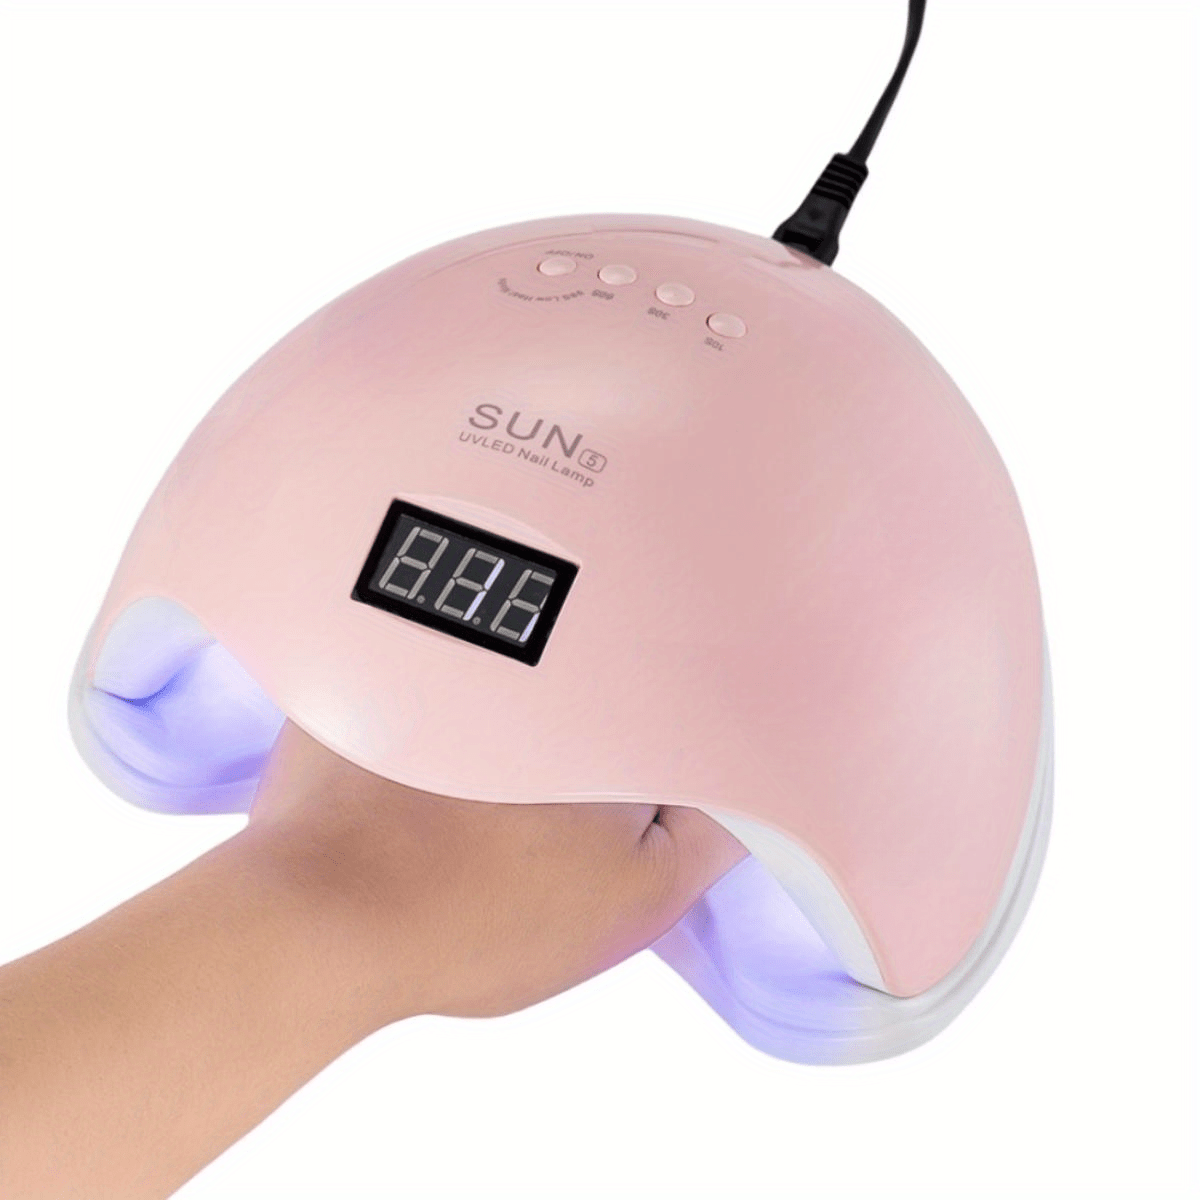 Hsmqhjwe Gifts for Girls 12-14 Years Old Mini LED Nail Lamp for Gel Nails 9 LED Flashlight Portability Nail Dryer Machine Tools Light Extended Gel